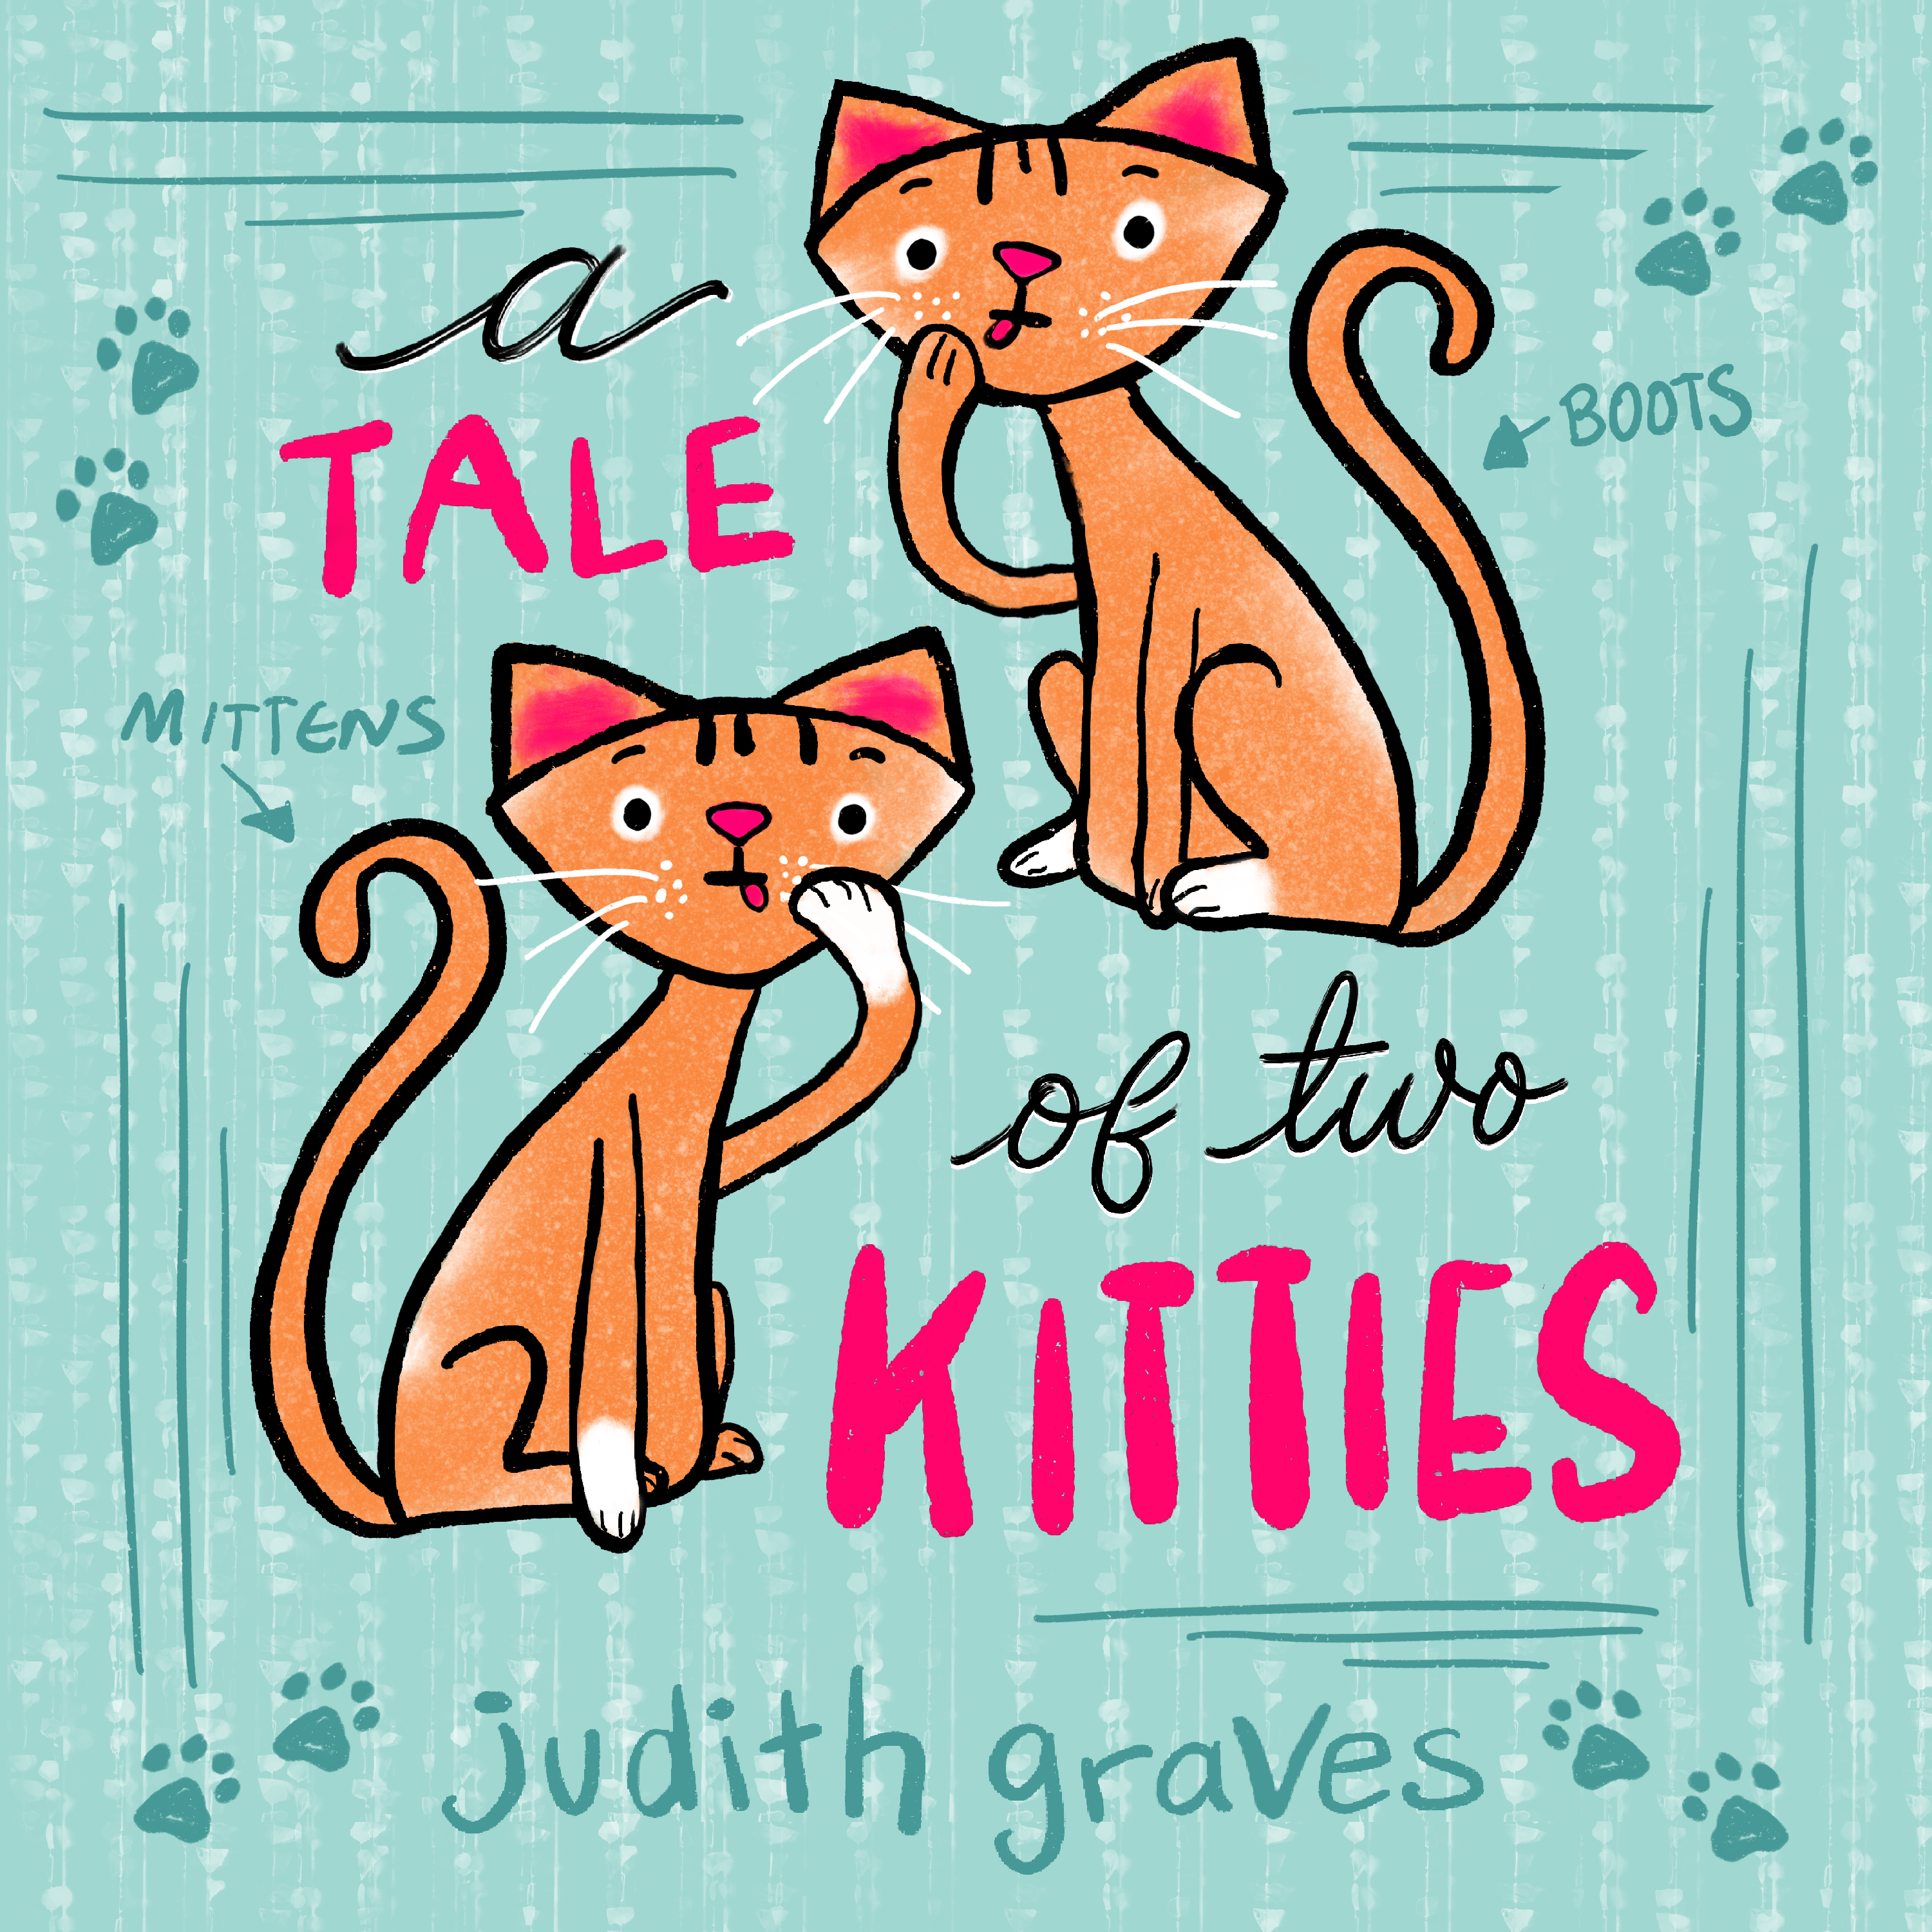 Cover featuring two illustrated cats staring out at reader, while licking their paws.